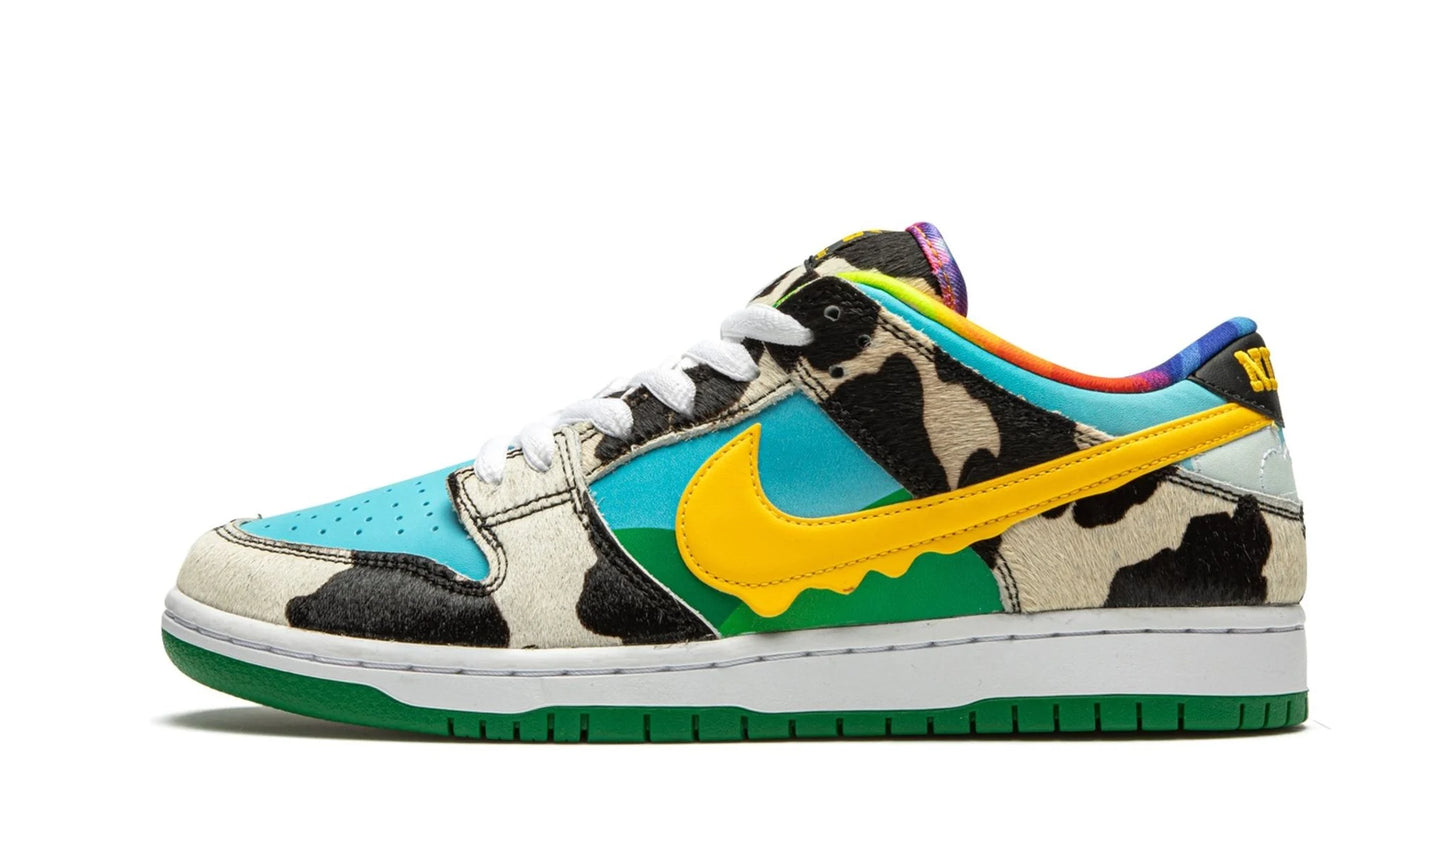 NIKE SB DUNK LOW "Ben & Jerry's - Chunky Dunky"